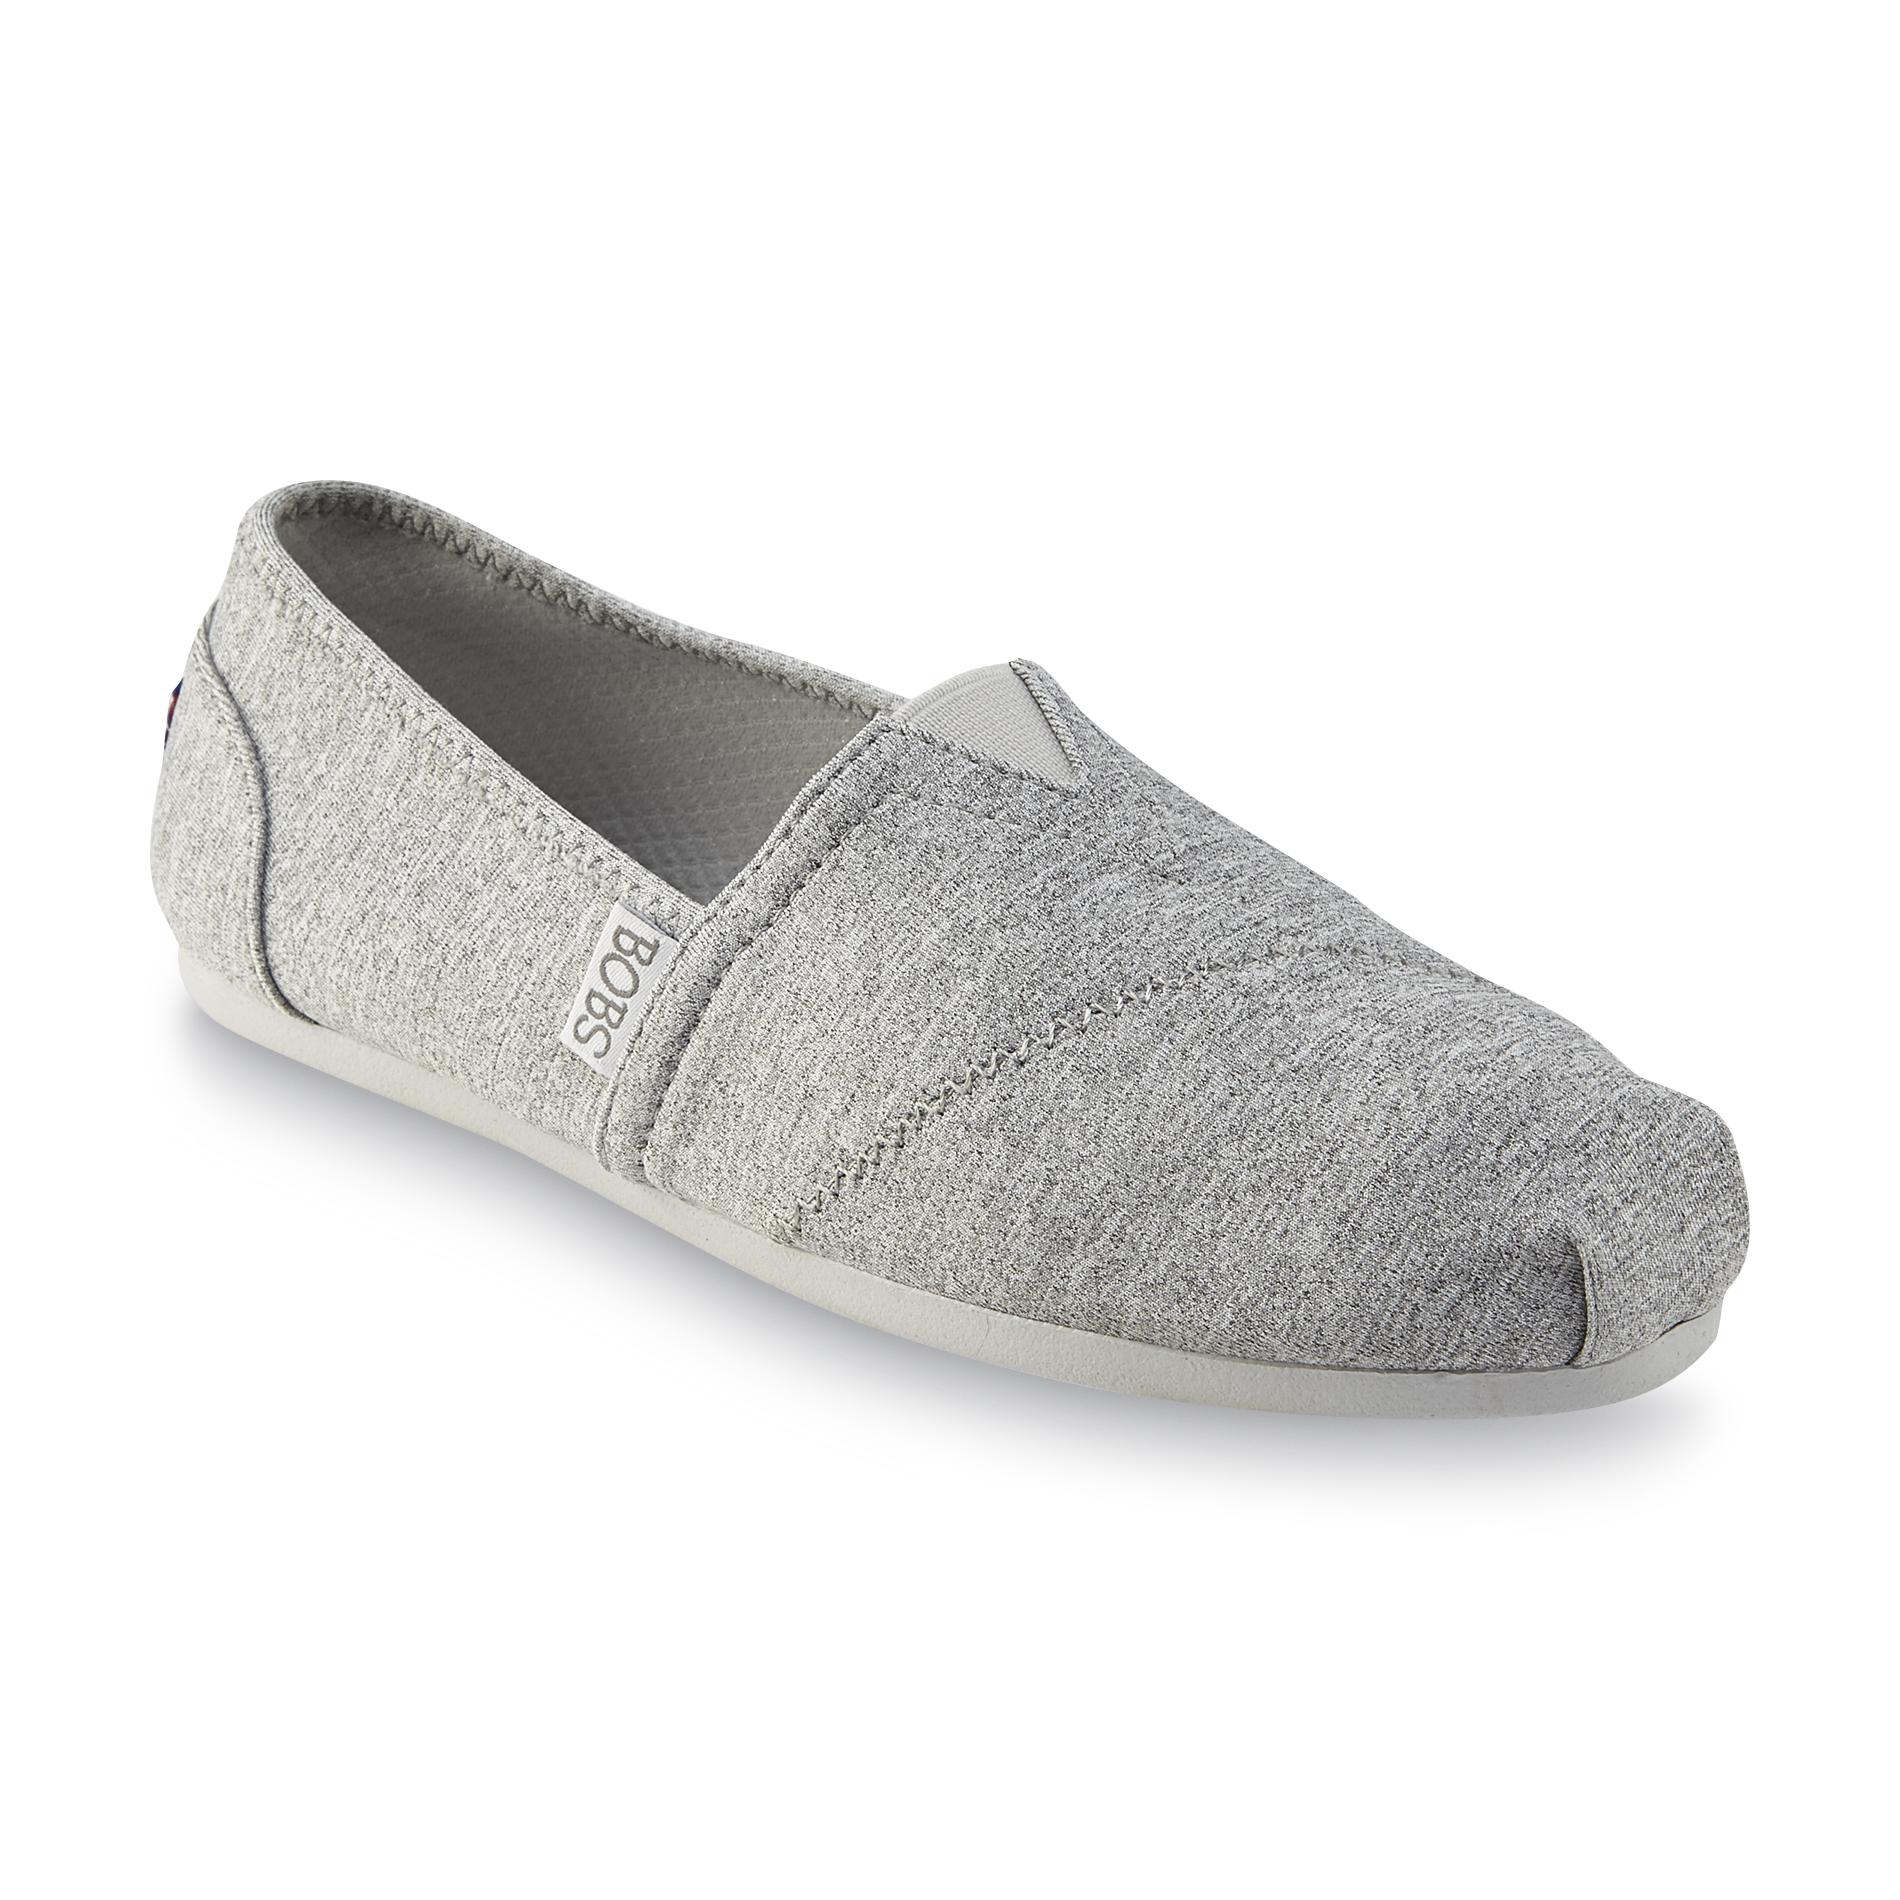 gray bobs shoes